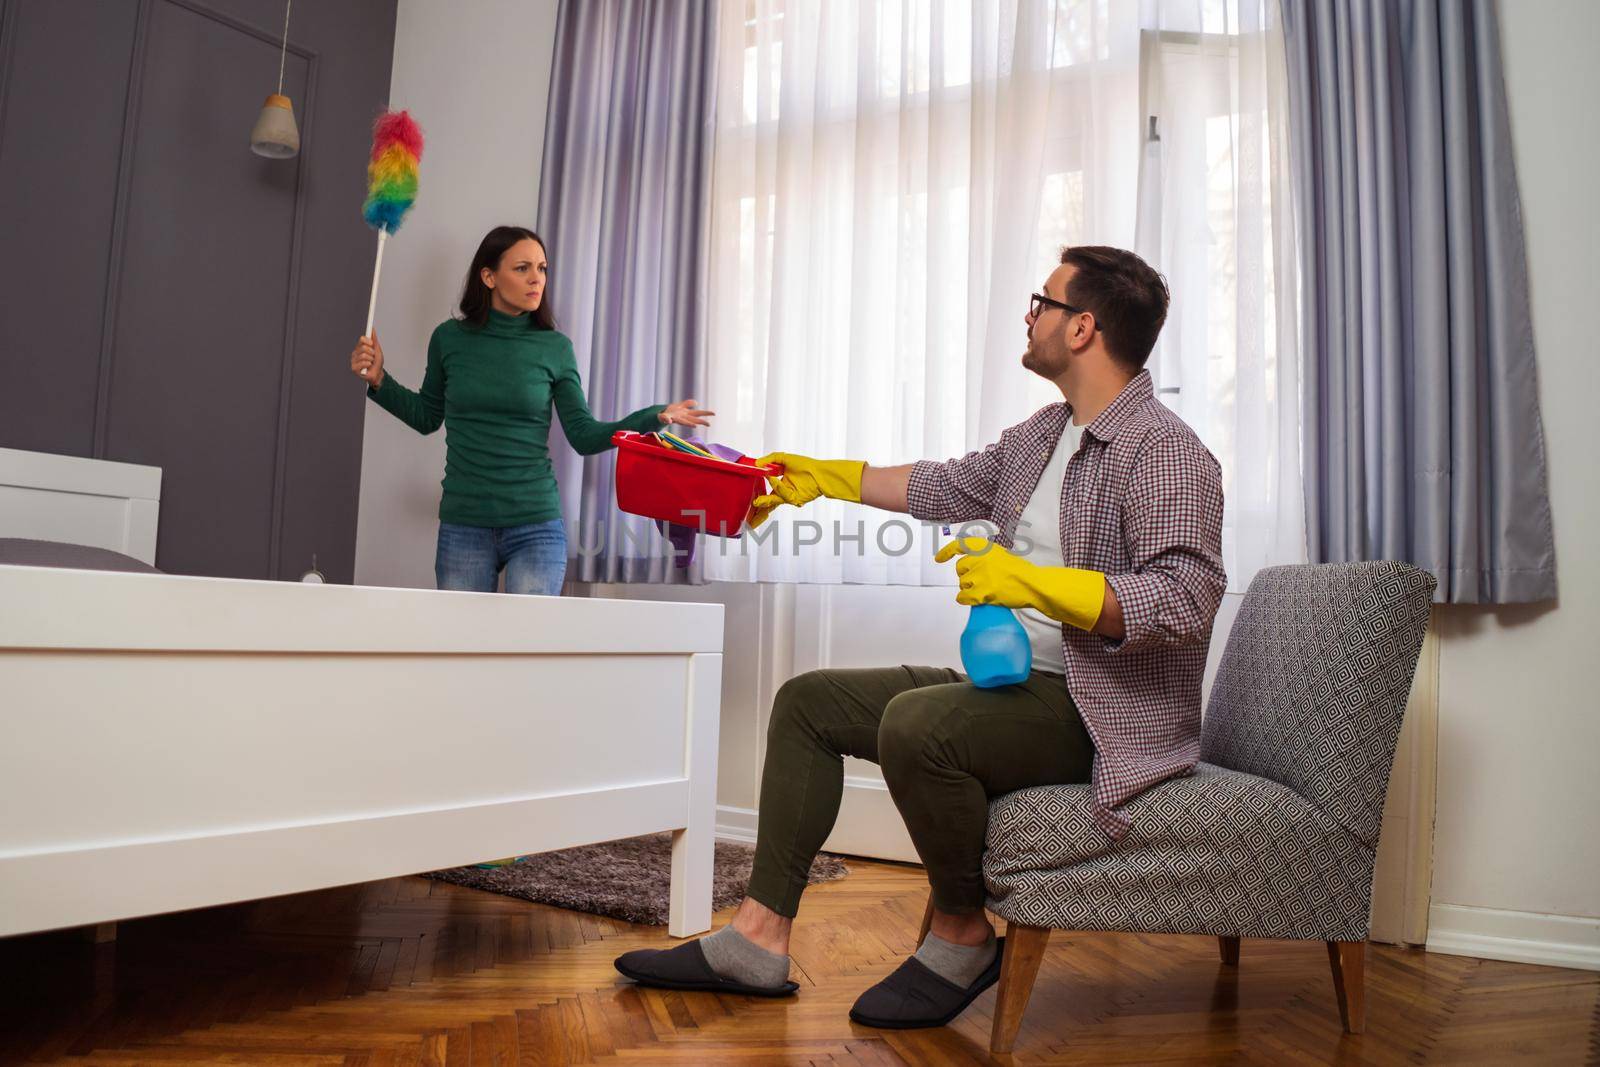 Woman is angry because her husband is lazy and avoids cleaning apartment.